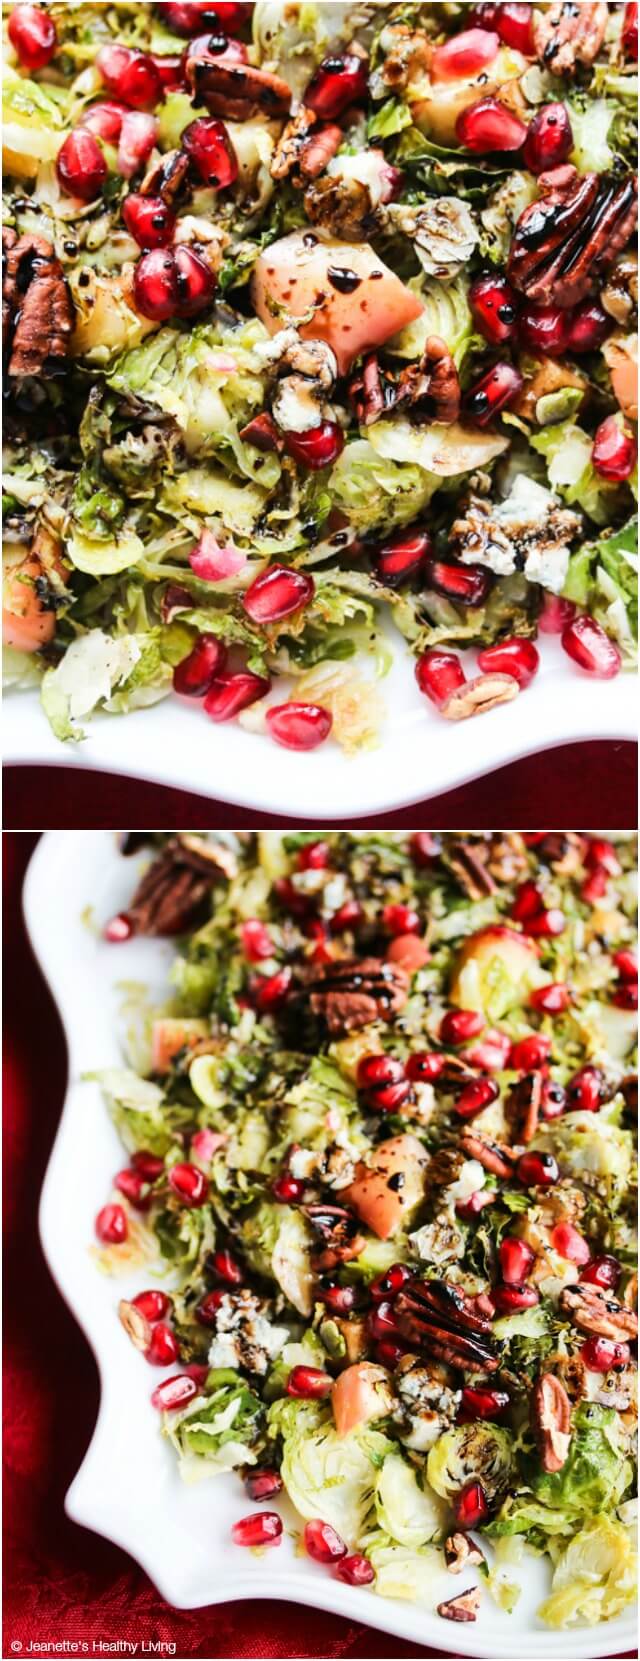 Warm Roasted Brussels Sprout Apple Salad with Blue Cheese and Pecans - a festive holiday salad to brighten up your table